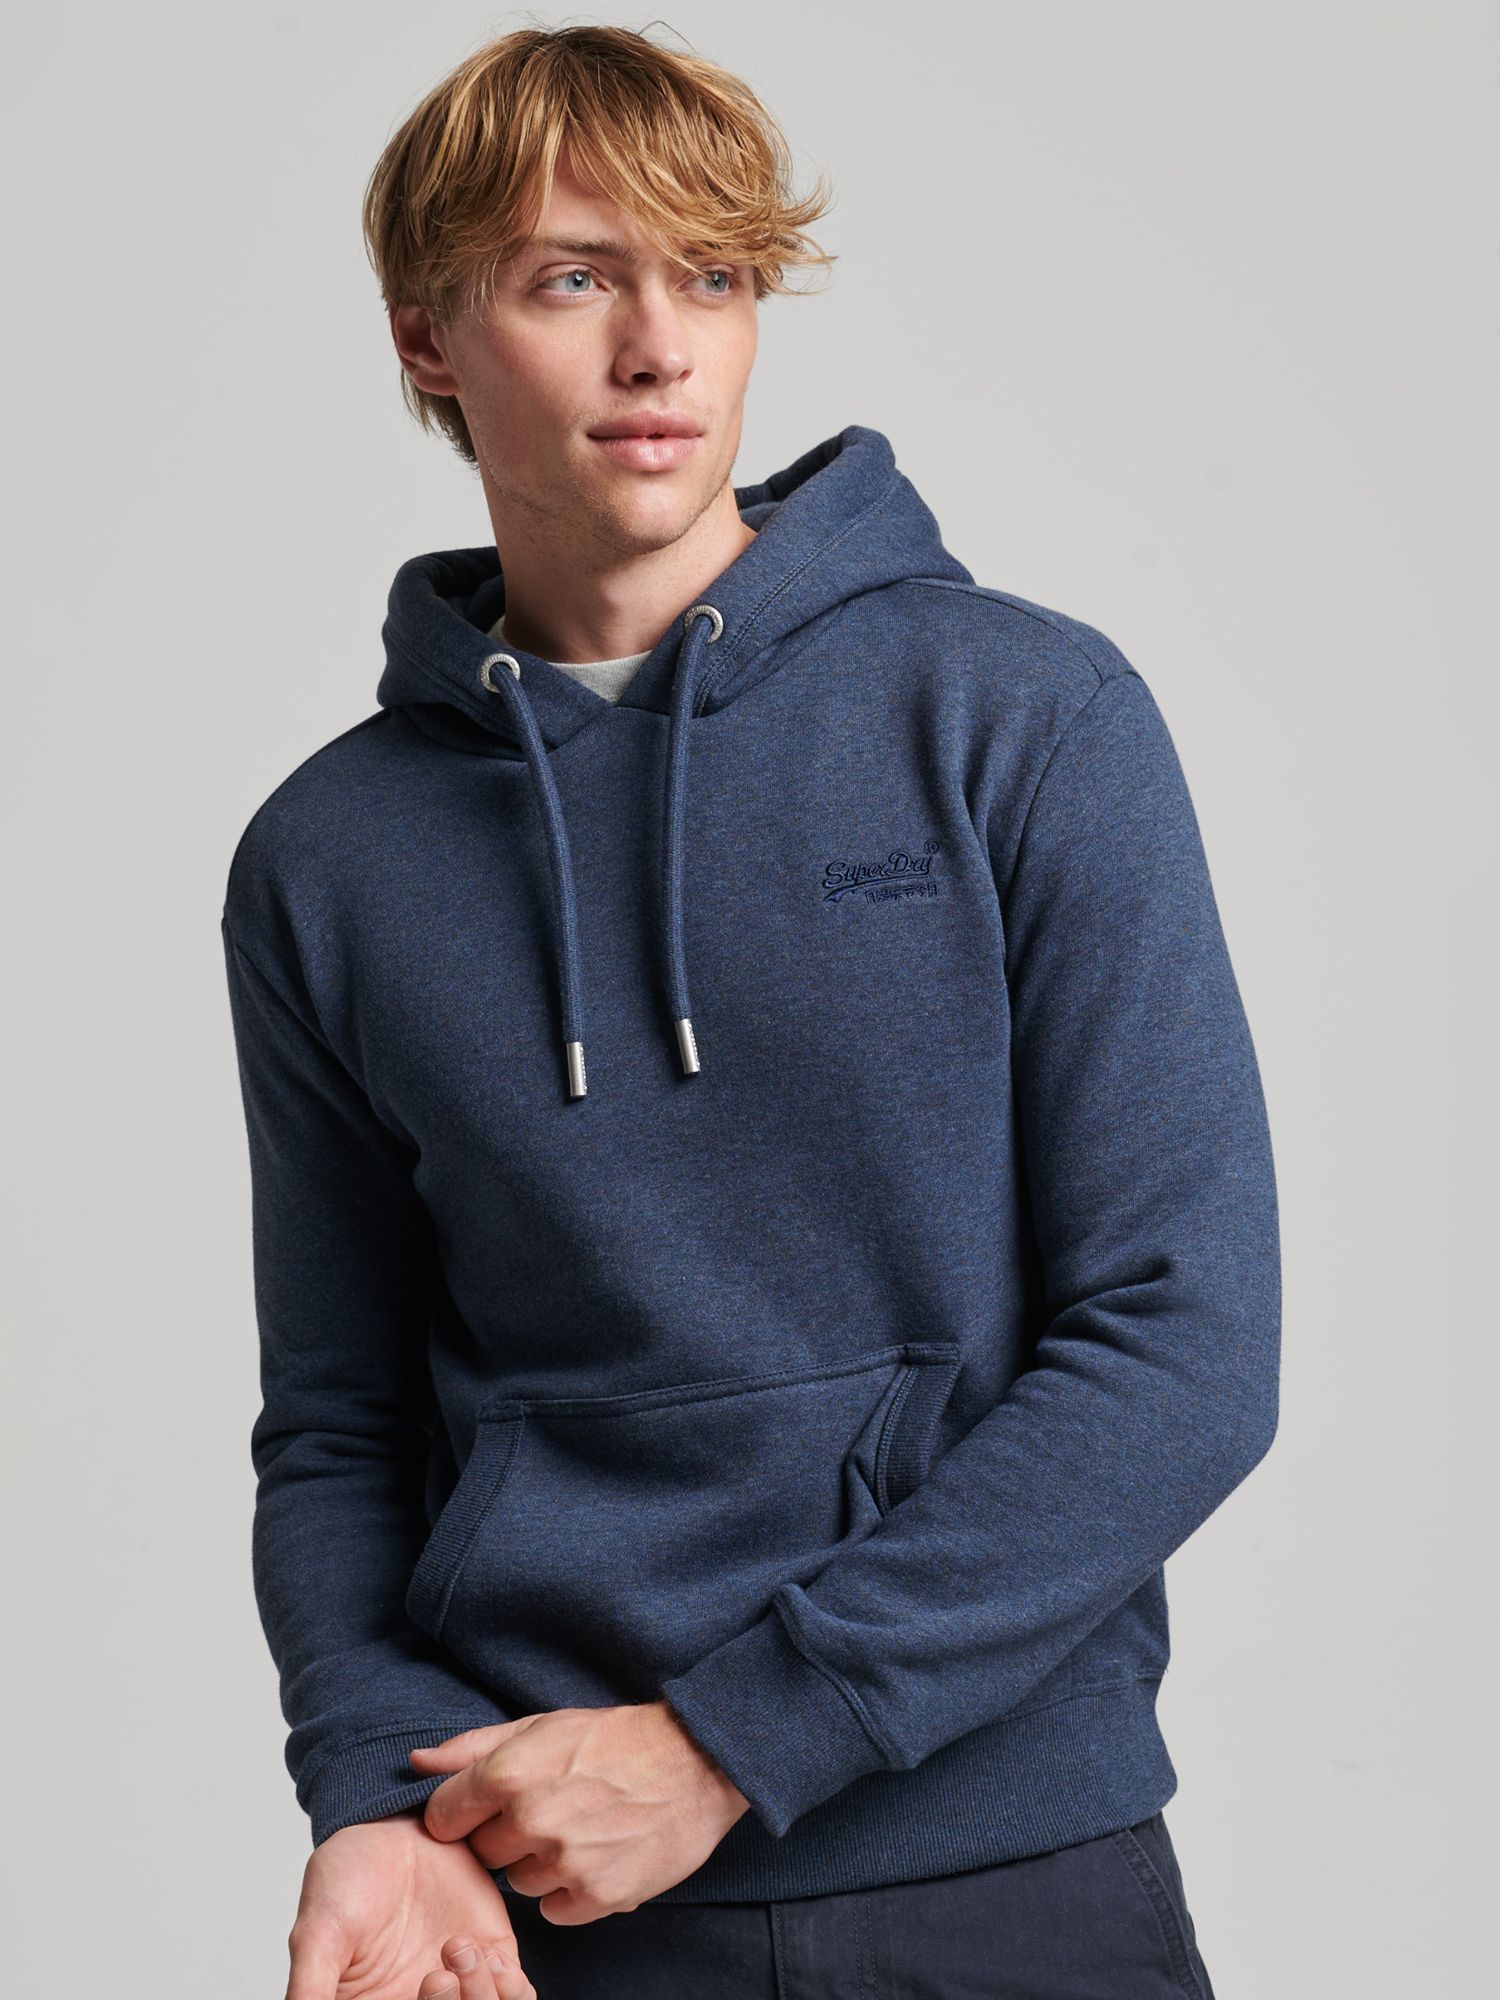 Superdry Gym Tech Court Overhead Hoodie  Hoodie outfit men, Mens outfits,  Gym outfit men